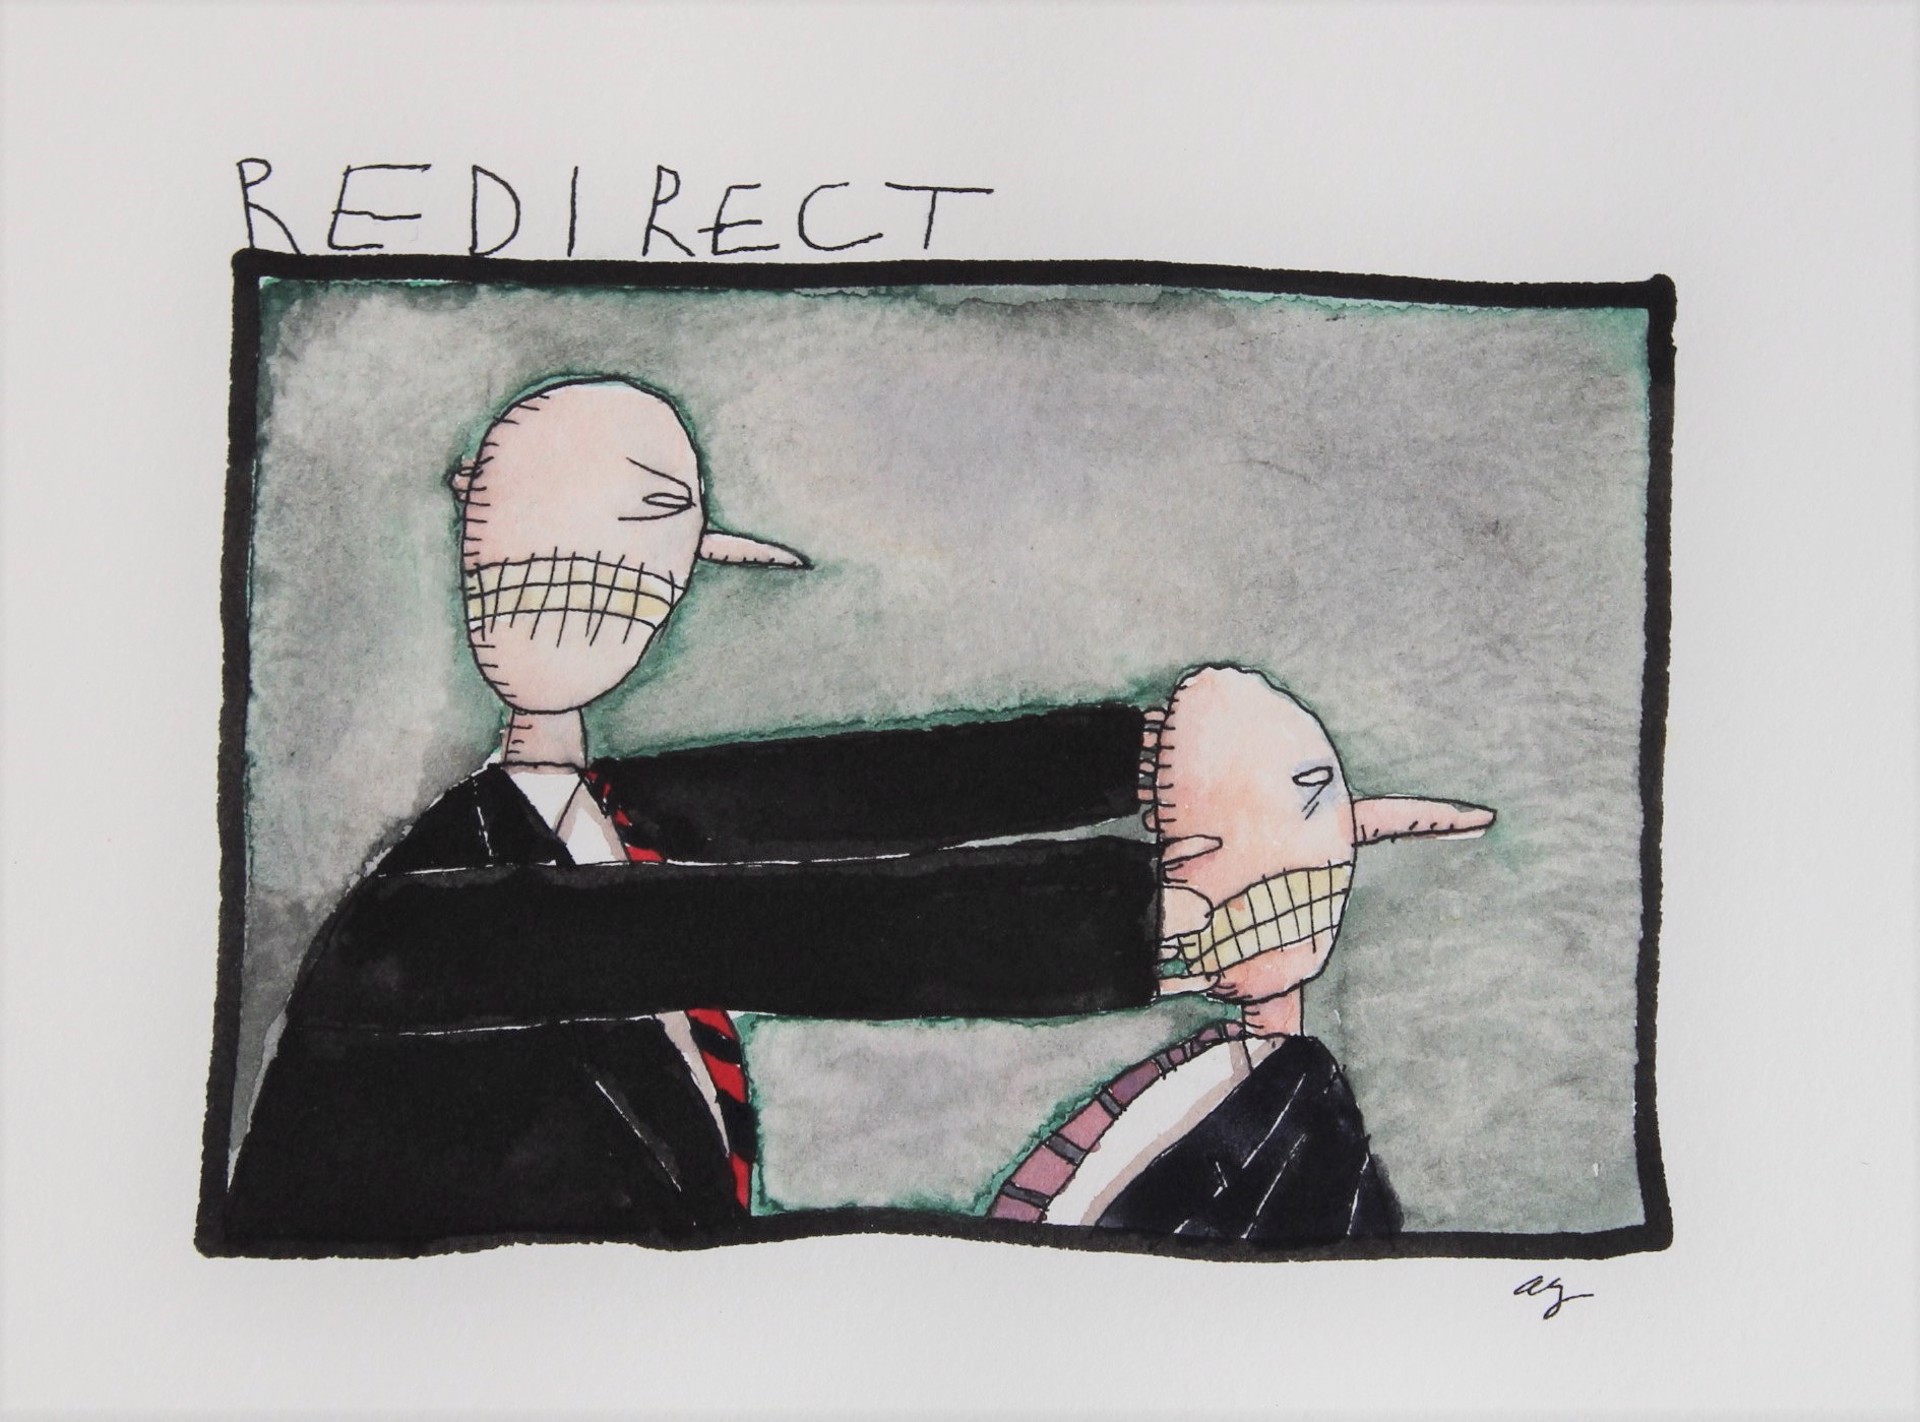 Redirect by Alan Gerson